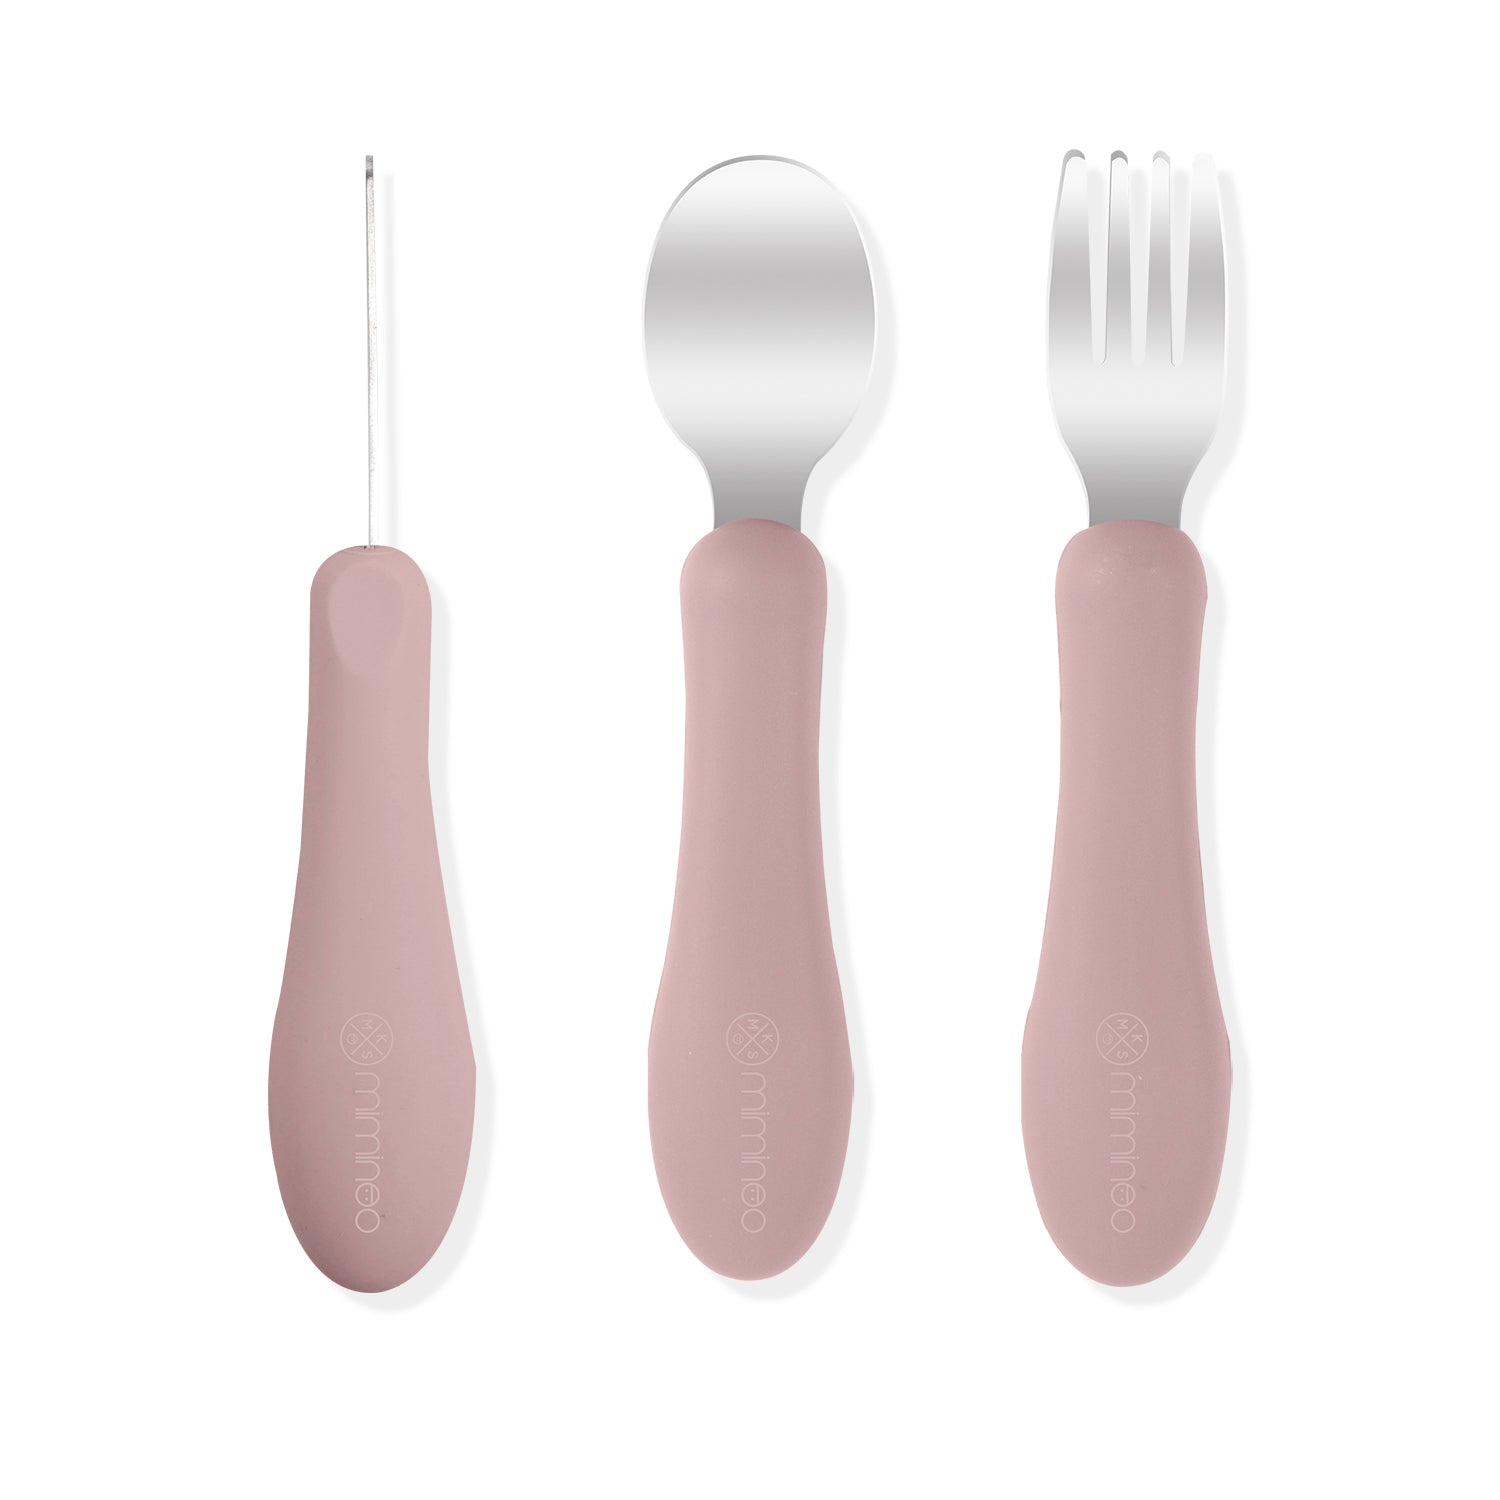 Stainless Steel Spoon & fork: Resistant to bacteria and Germs.